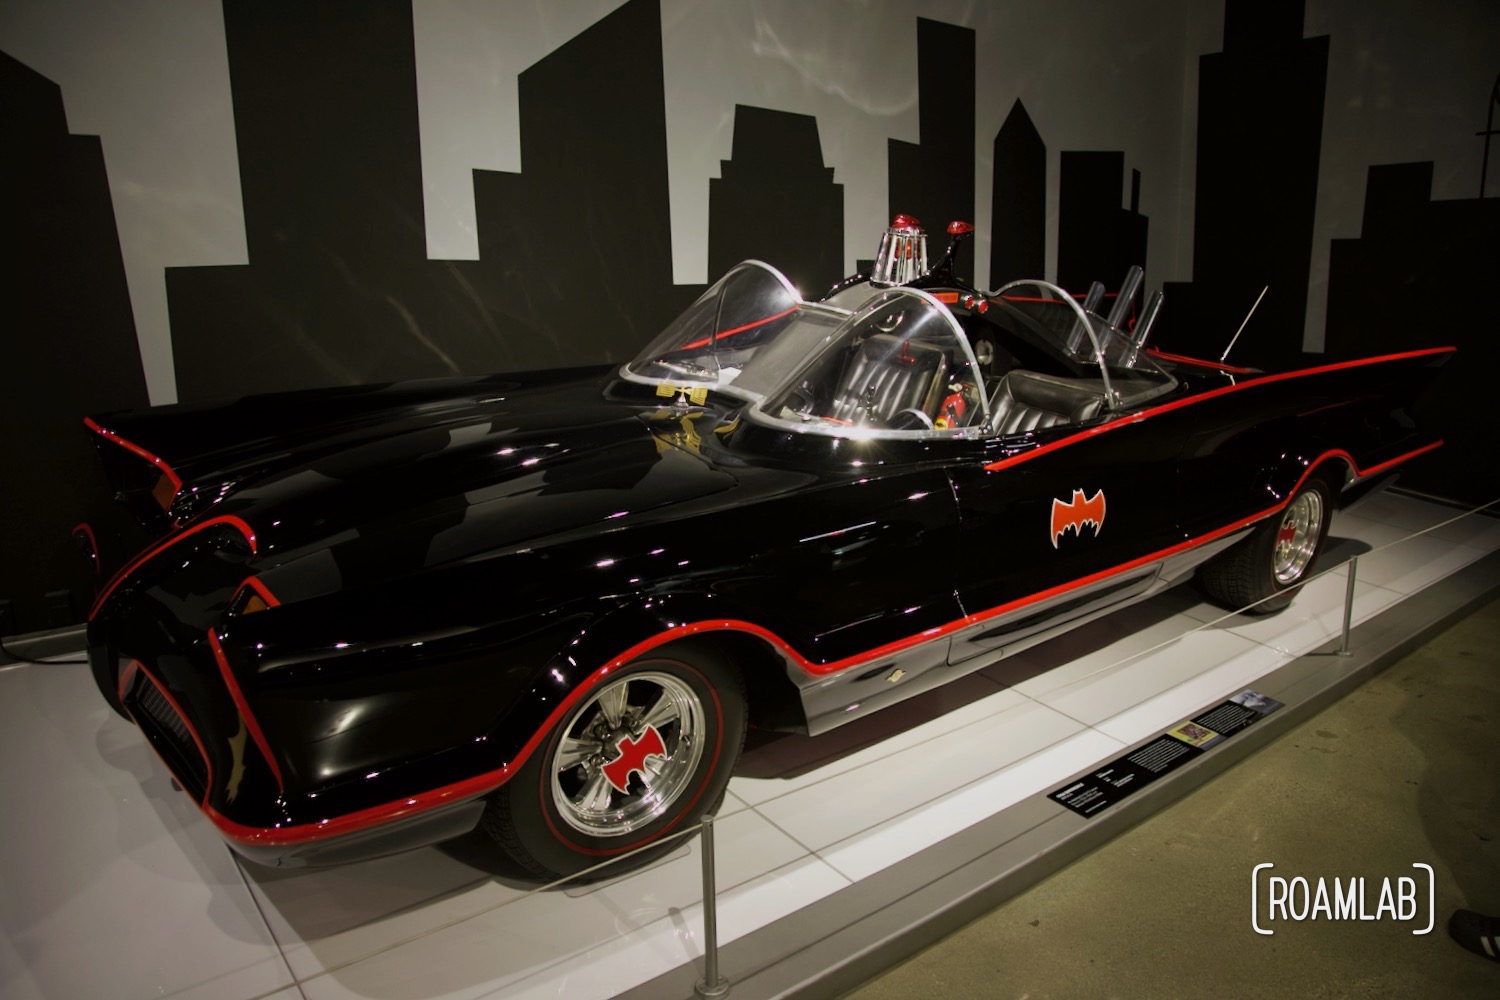 1966 Batmobile on display at the Petersen Automotive Museum